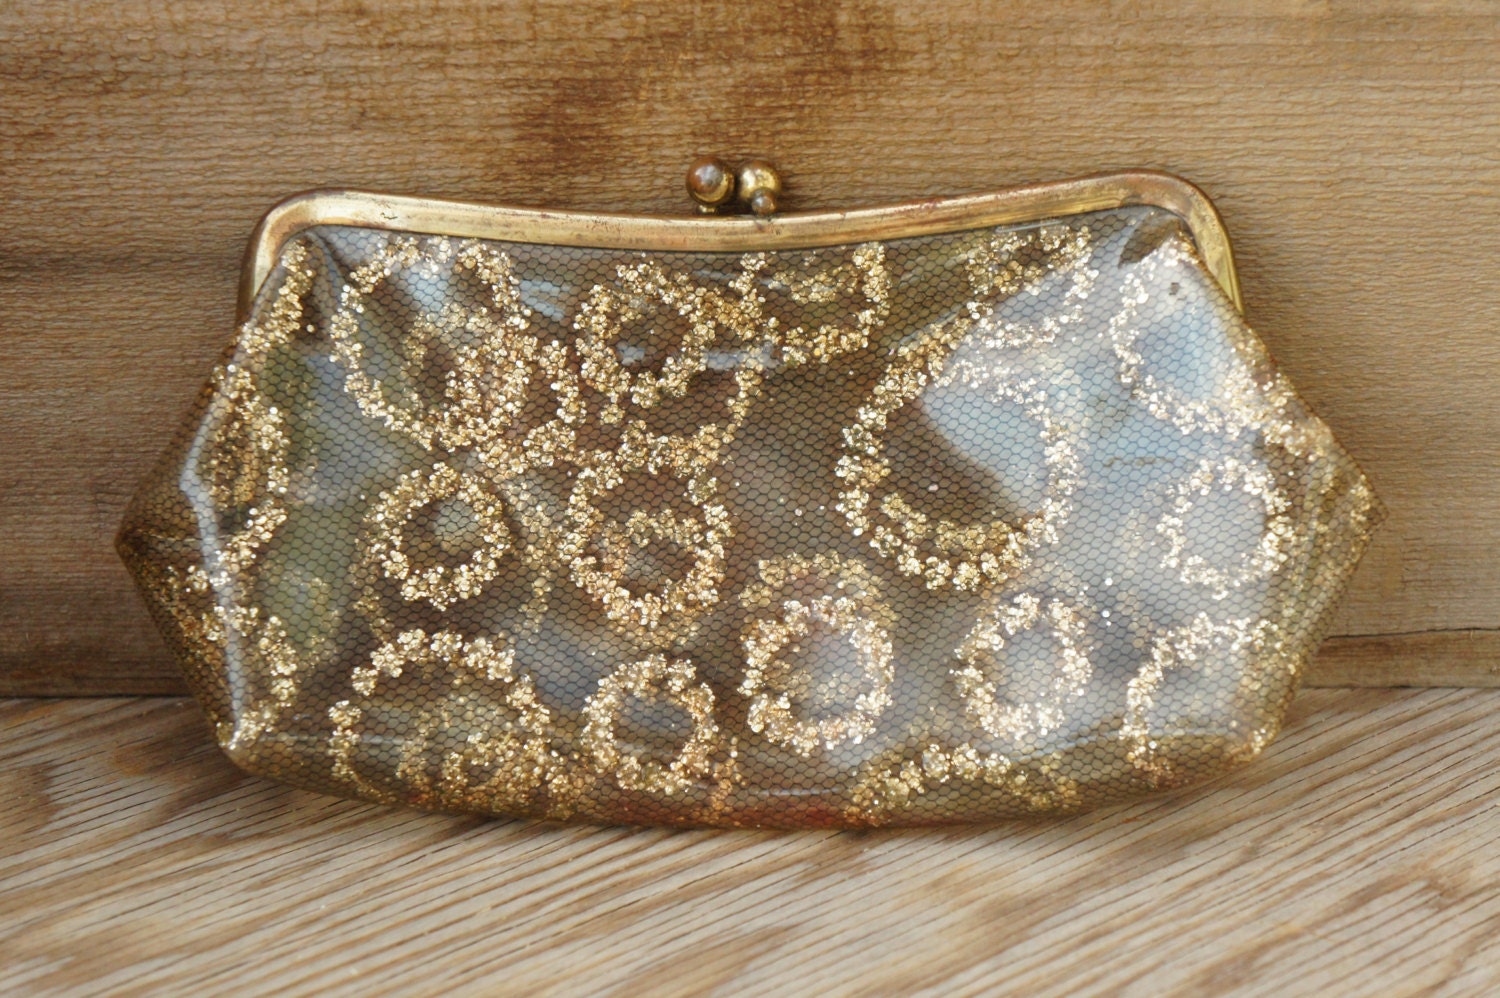 Vintage 60s Mod Clear Plastic And Lace Gold Clutch Purse Make